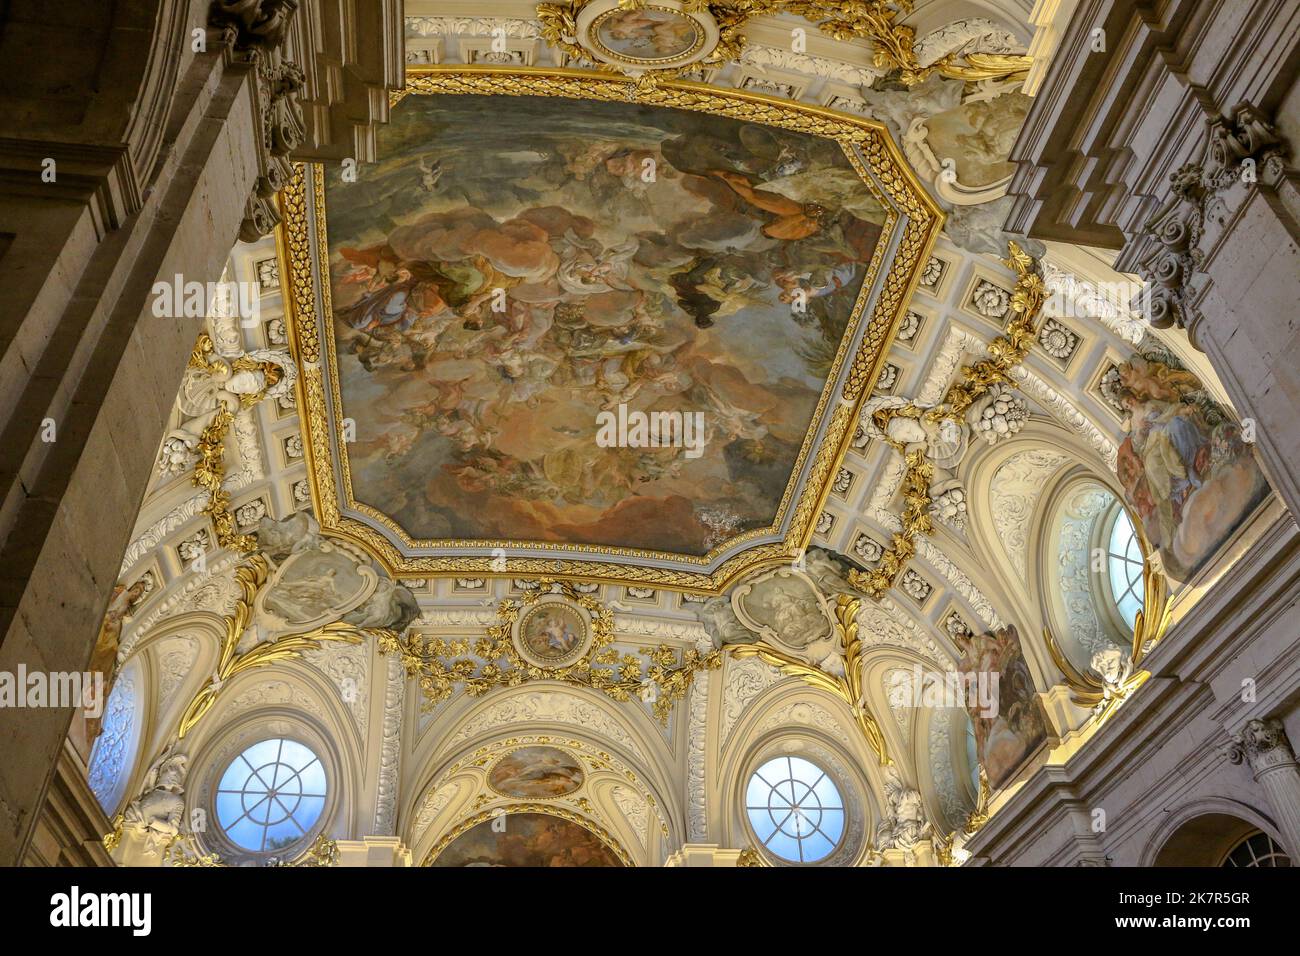 Painted ceiling from the Royal Palace in the city of Madrid, Spain Stock Photo